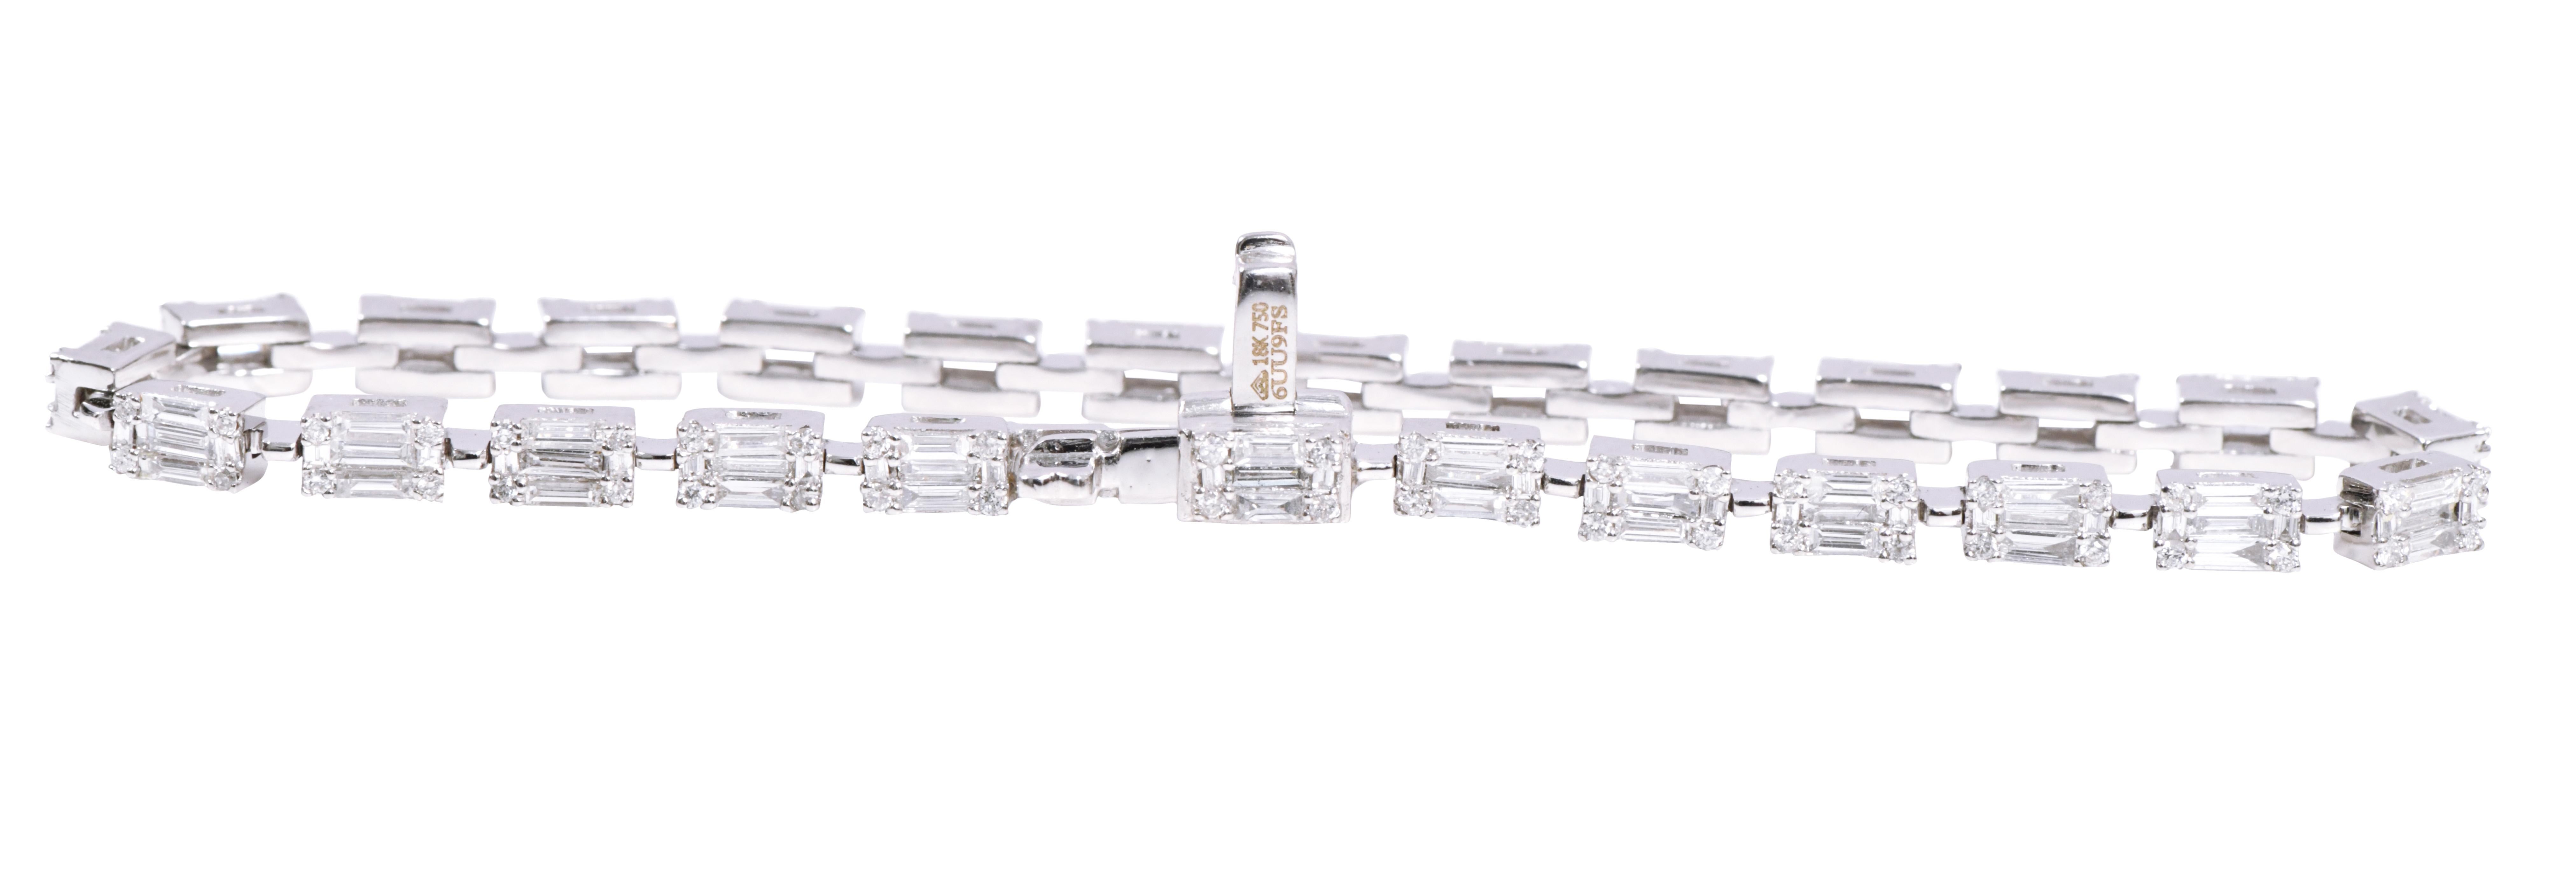 18 Karat White Gold 2.81 Carats Diamond Tennis Bracelet

When it comes to jewelry, we can never be specific as our heart always wants the most of it. Every piece of  jewelry has it’s own charm but one thing that remains constant and rather keeps